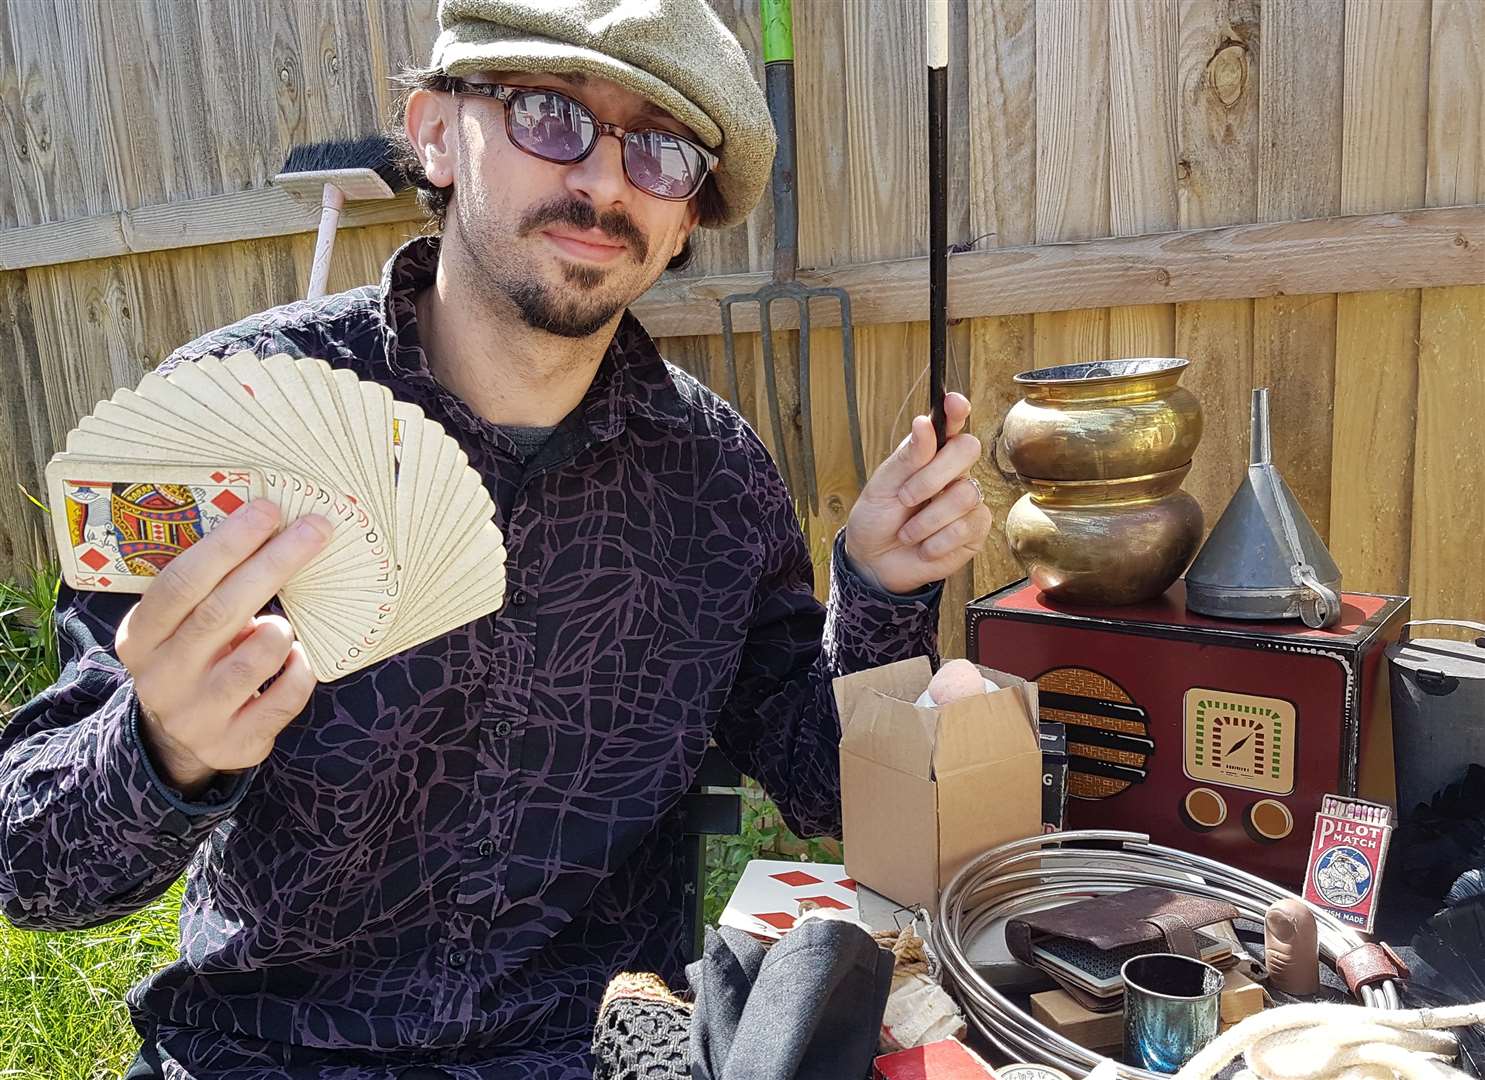 Entertainer Ashley White, who bought a box of his personal effects and magic tricks at auction